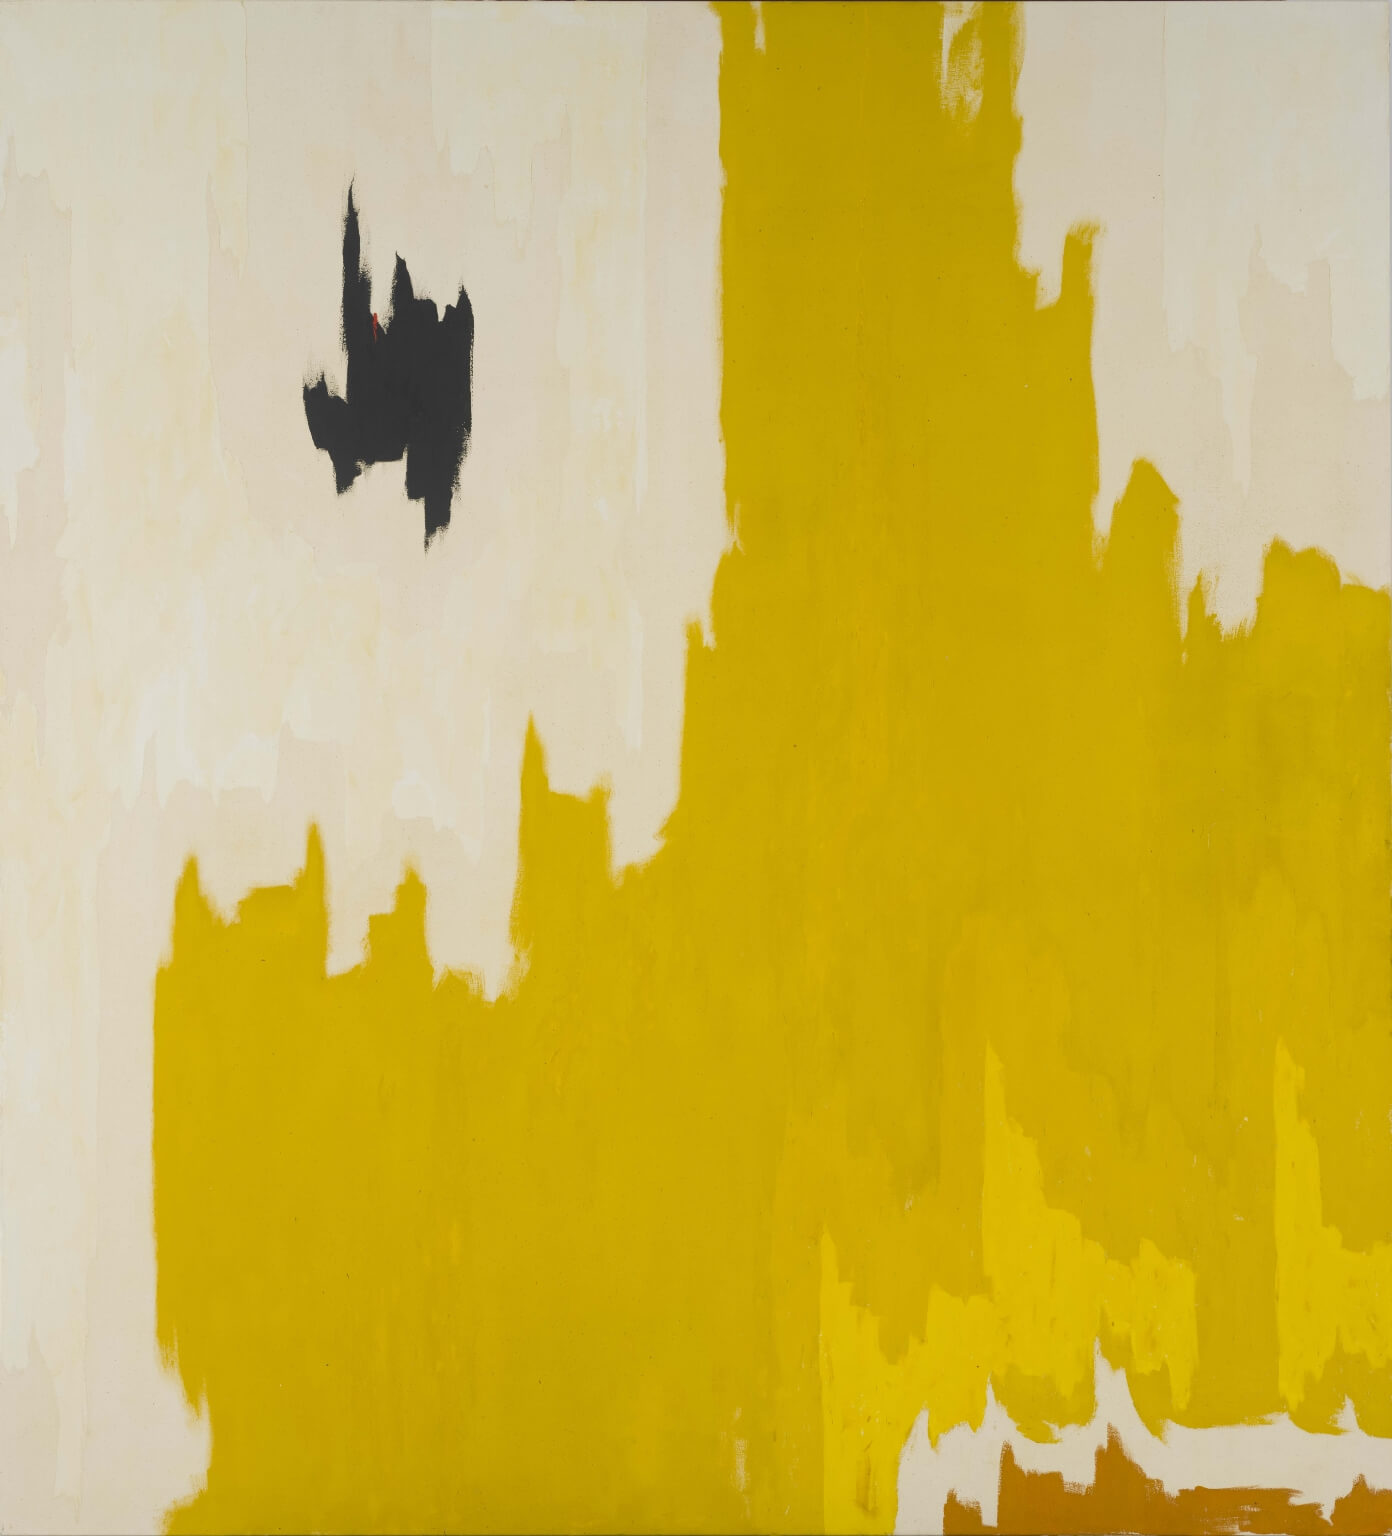 Abstract oil painting with bare canvas visible and goldish yellow paint in large area moving upwards with smaller highlights of yellow, white, and a small black figure on the left side